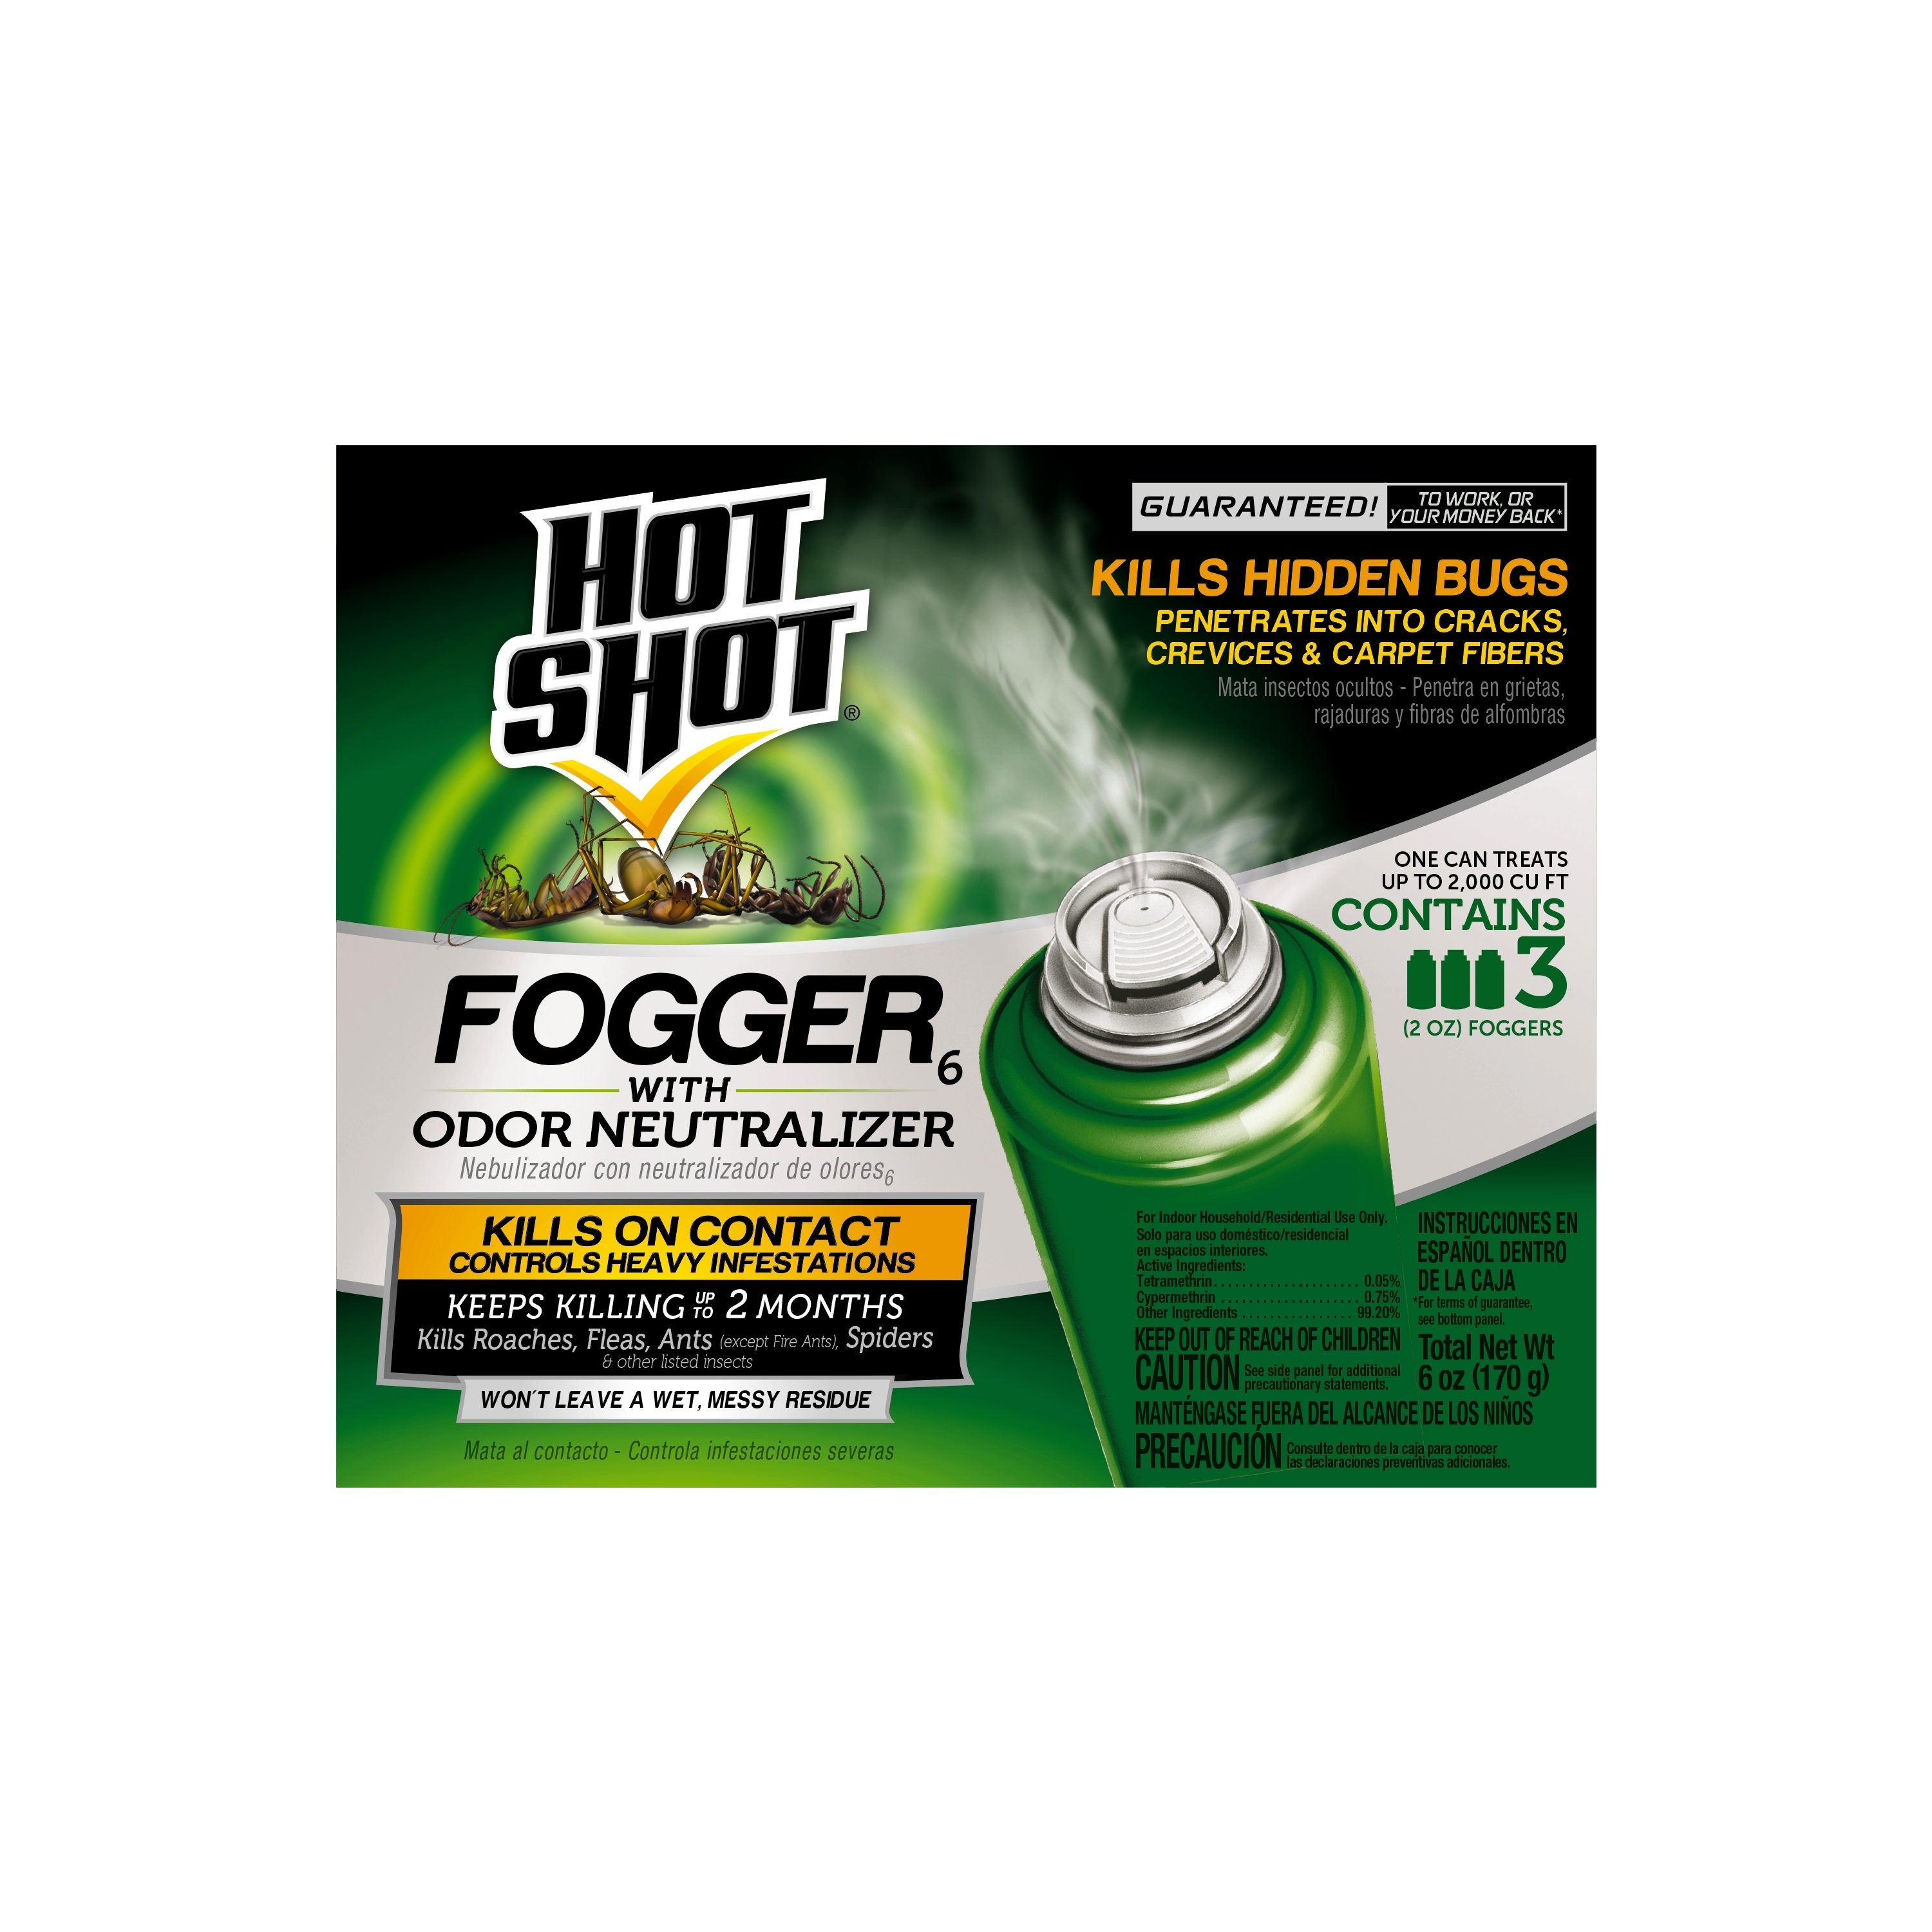 Hot Shot Fogger with Odor Neutralizer, 6 Oz., 3 Count